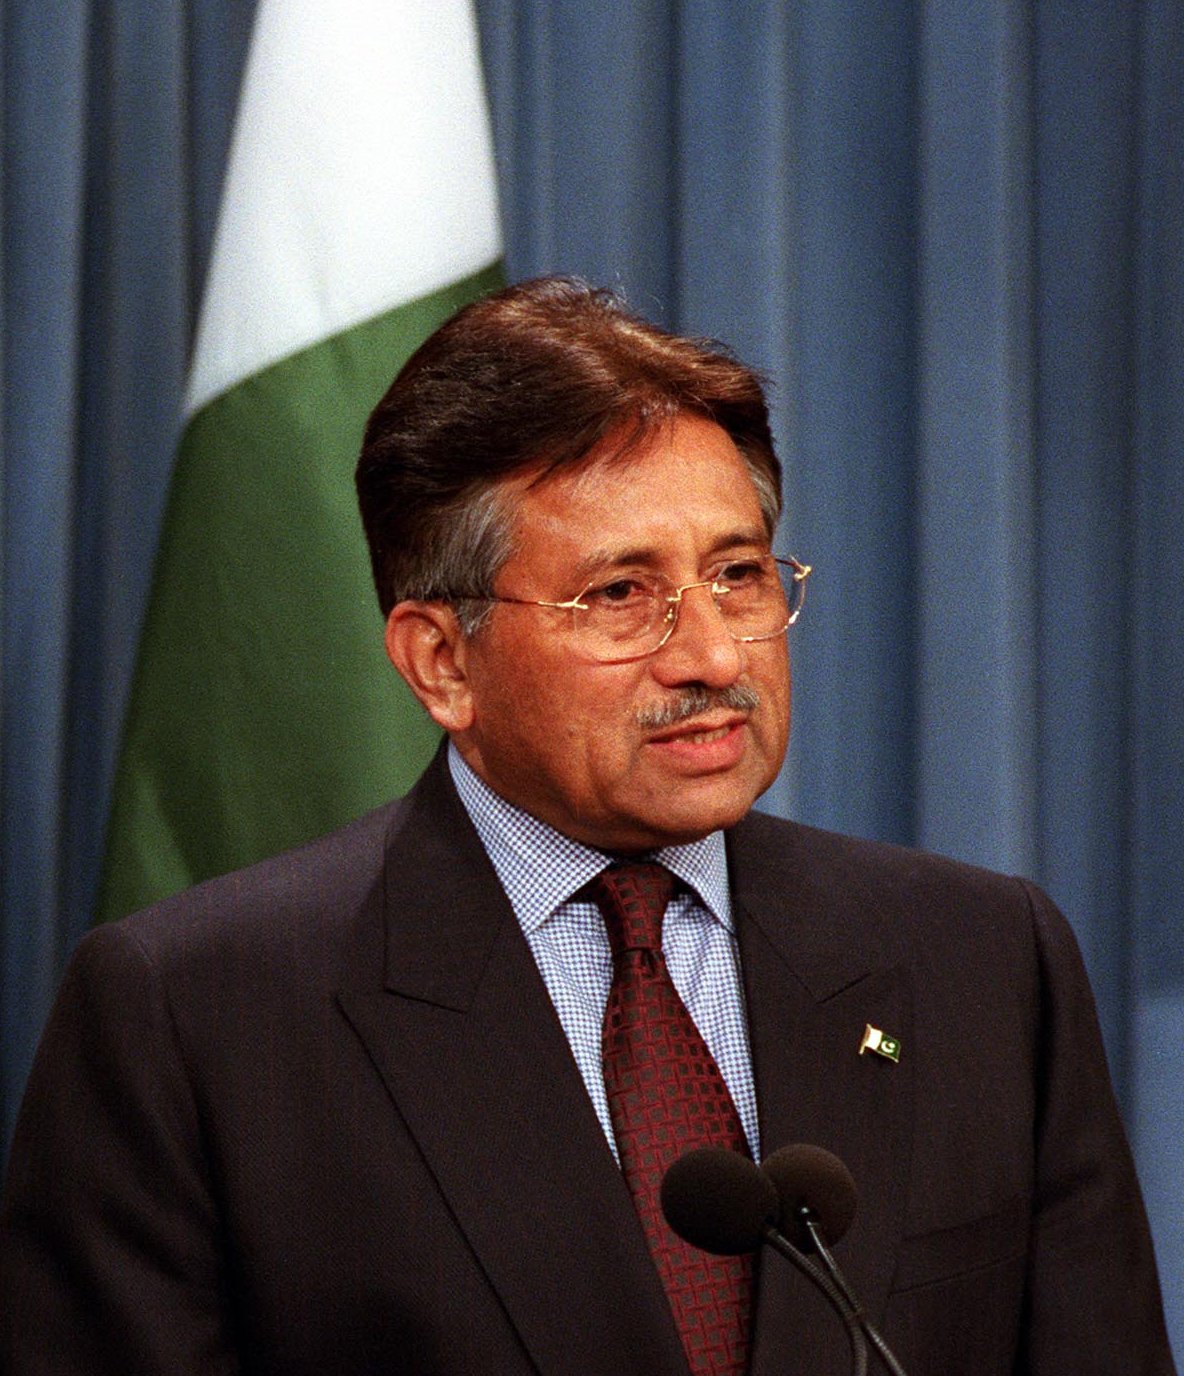 Pakistan's former dictator Pervez Musharraf was accused of suspending the Constitution and imposing emergency rule in 2007, a punishable offence for which he was indicted in 2014.

